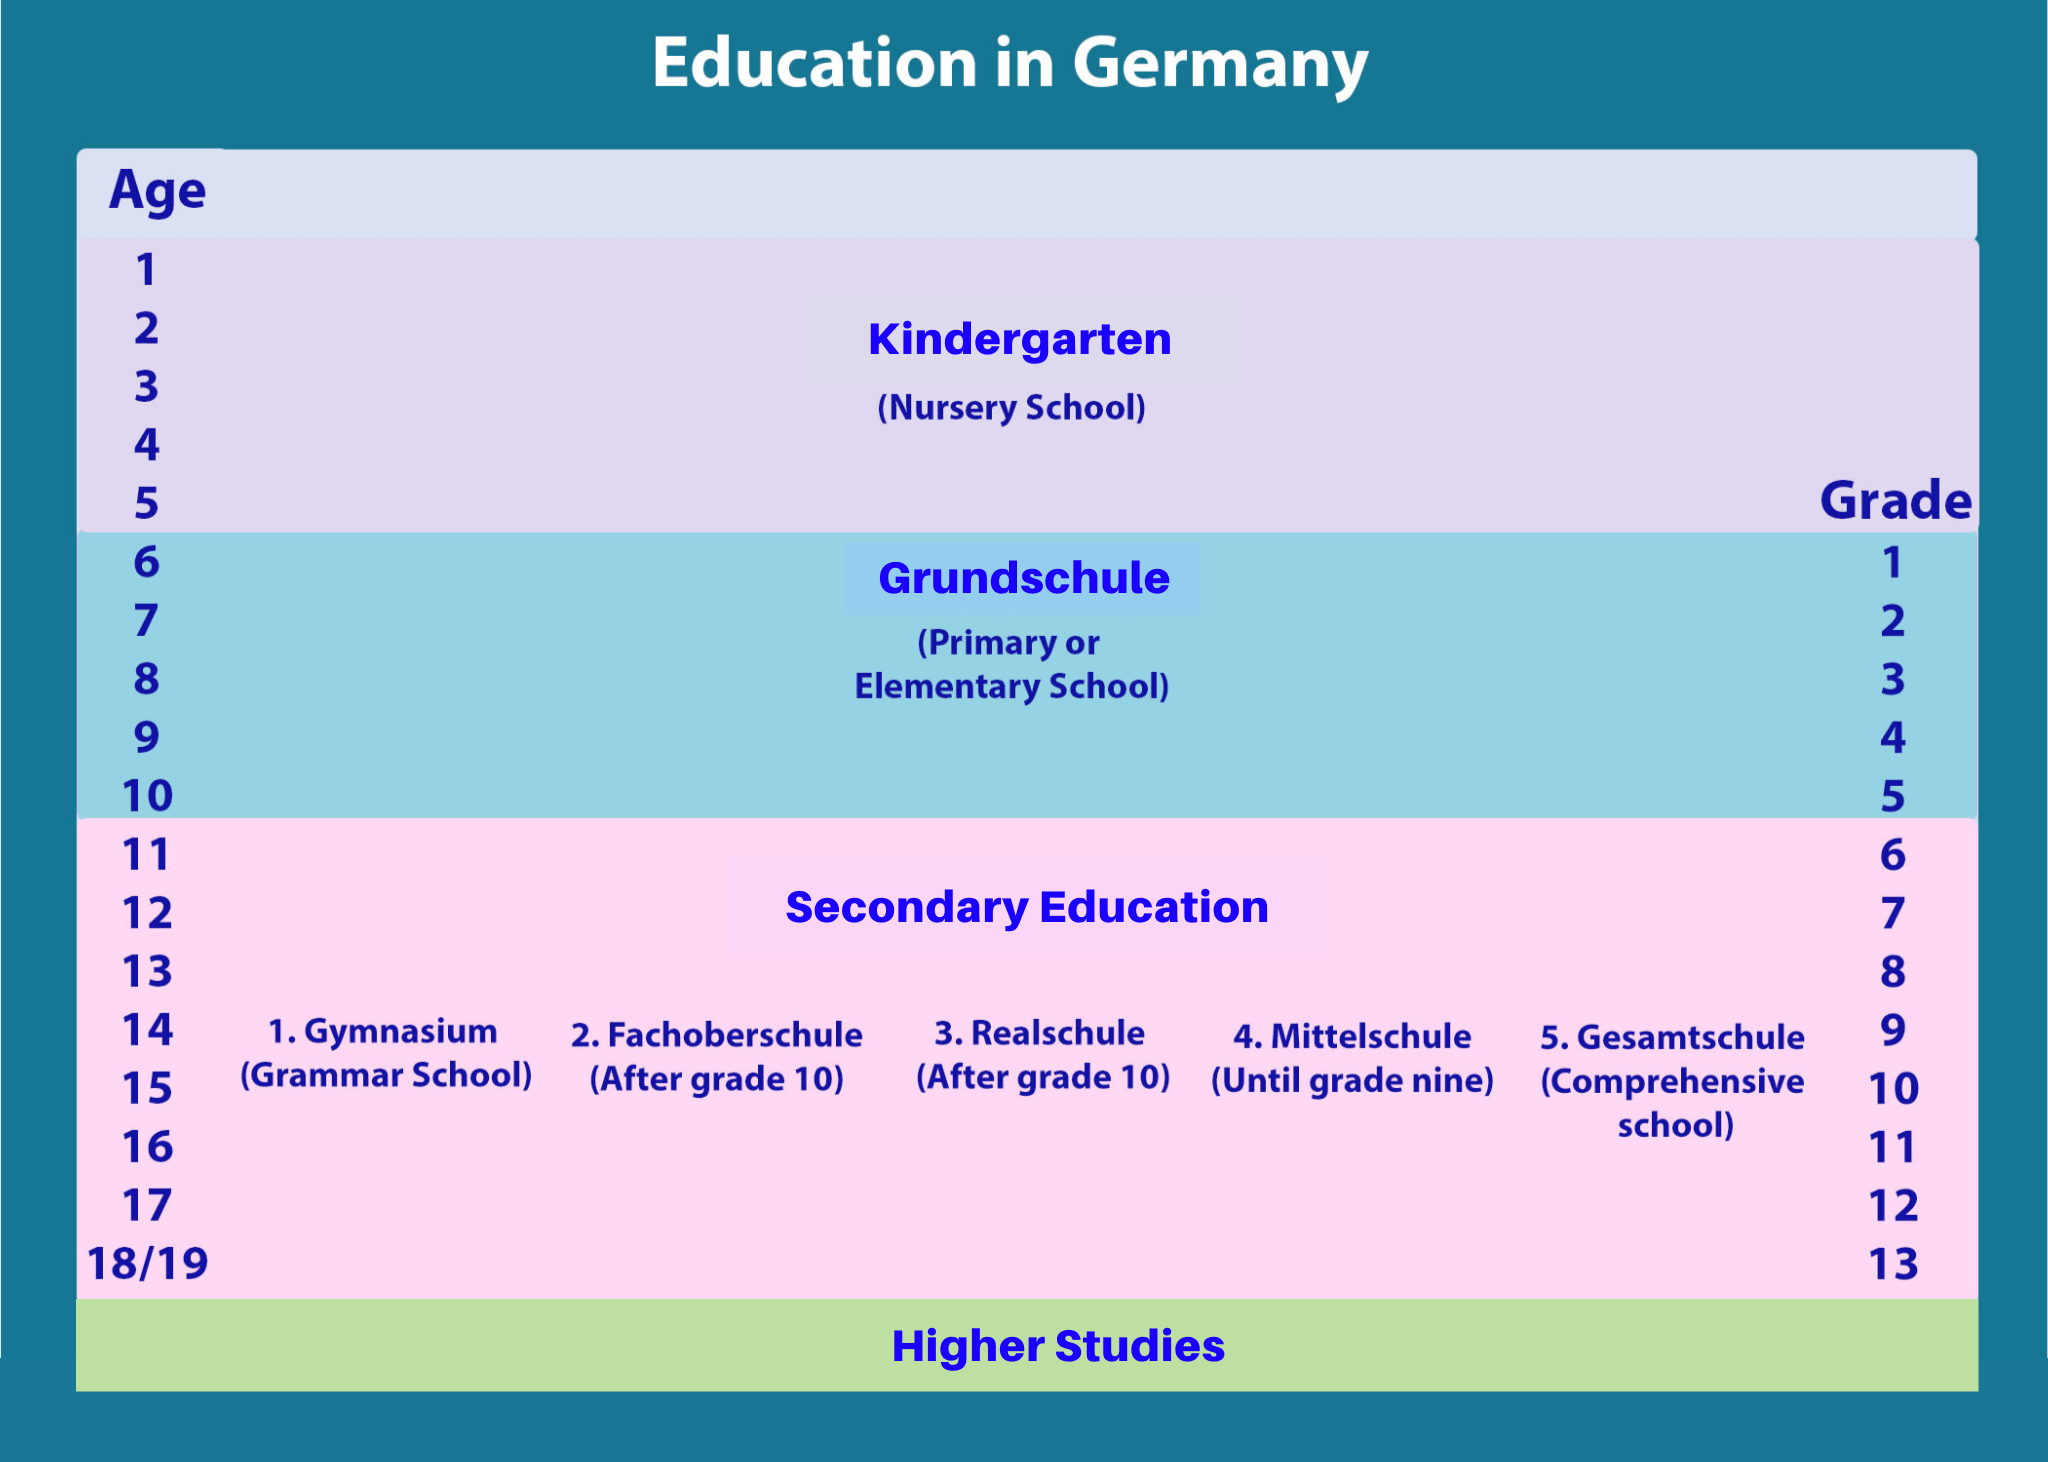 Level of Education in Germany